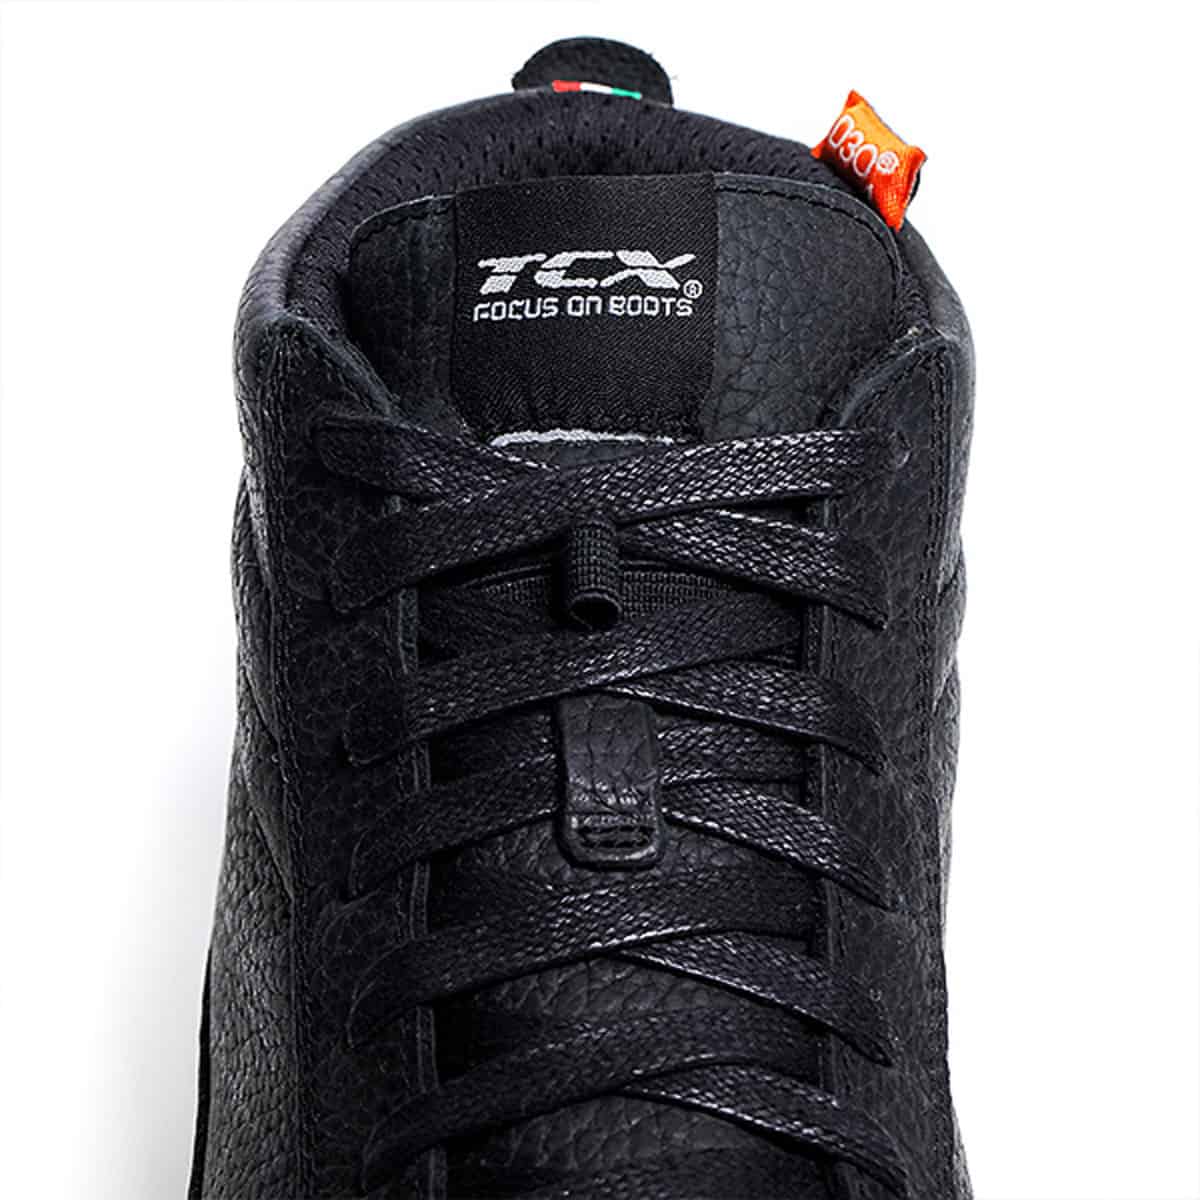 The TCX Street 3 motorbike shoes: Sportsfashion inspired motorcycle trainer - lace closure